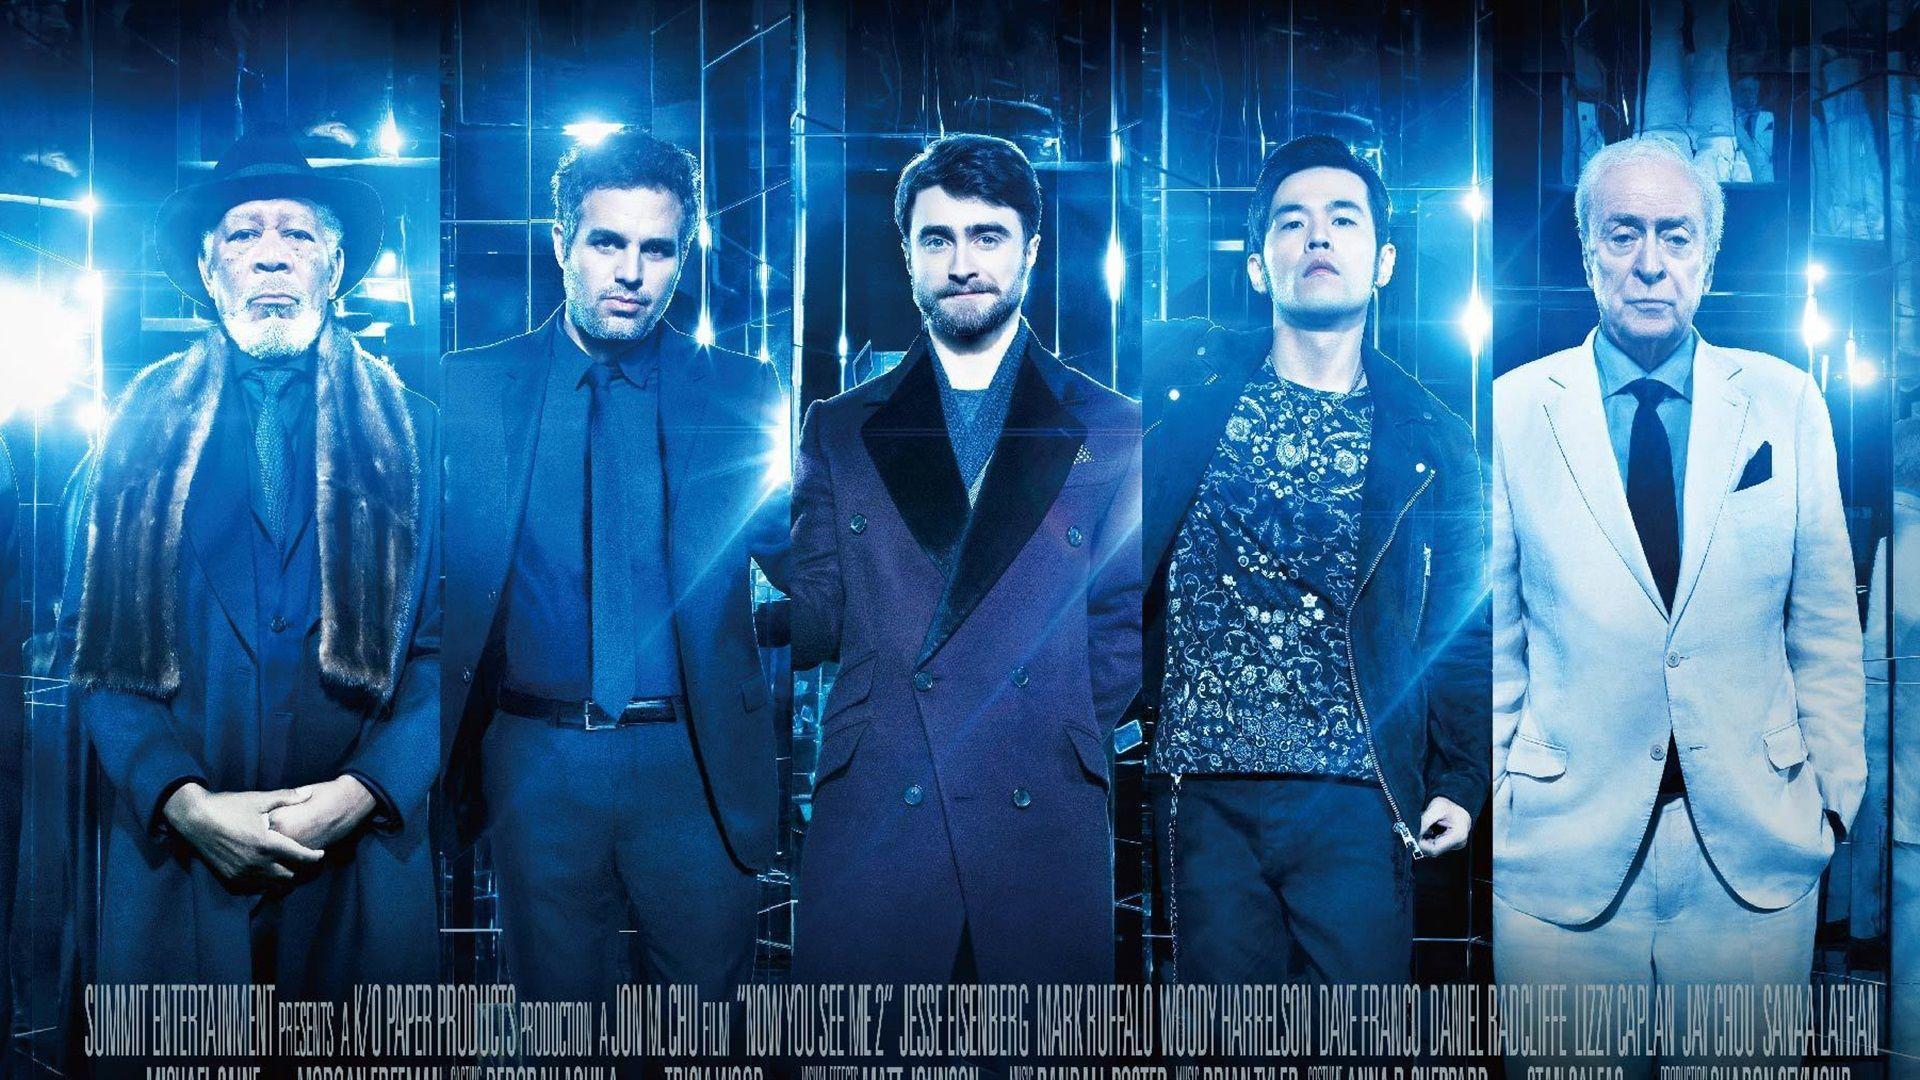 Now You See Me 2 2016 wallpaper. movies and tv series. Wallpaper